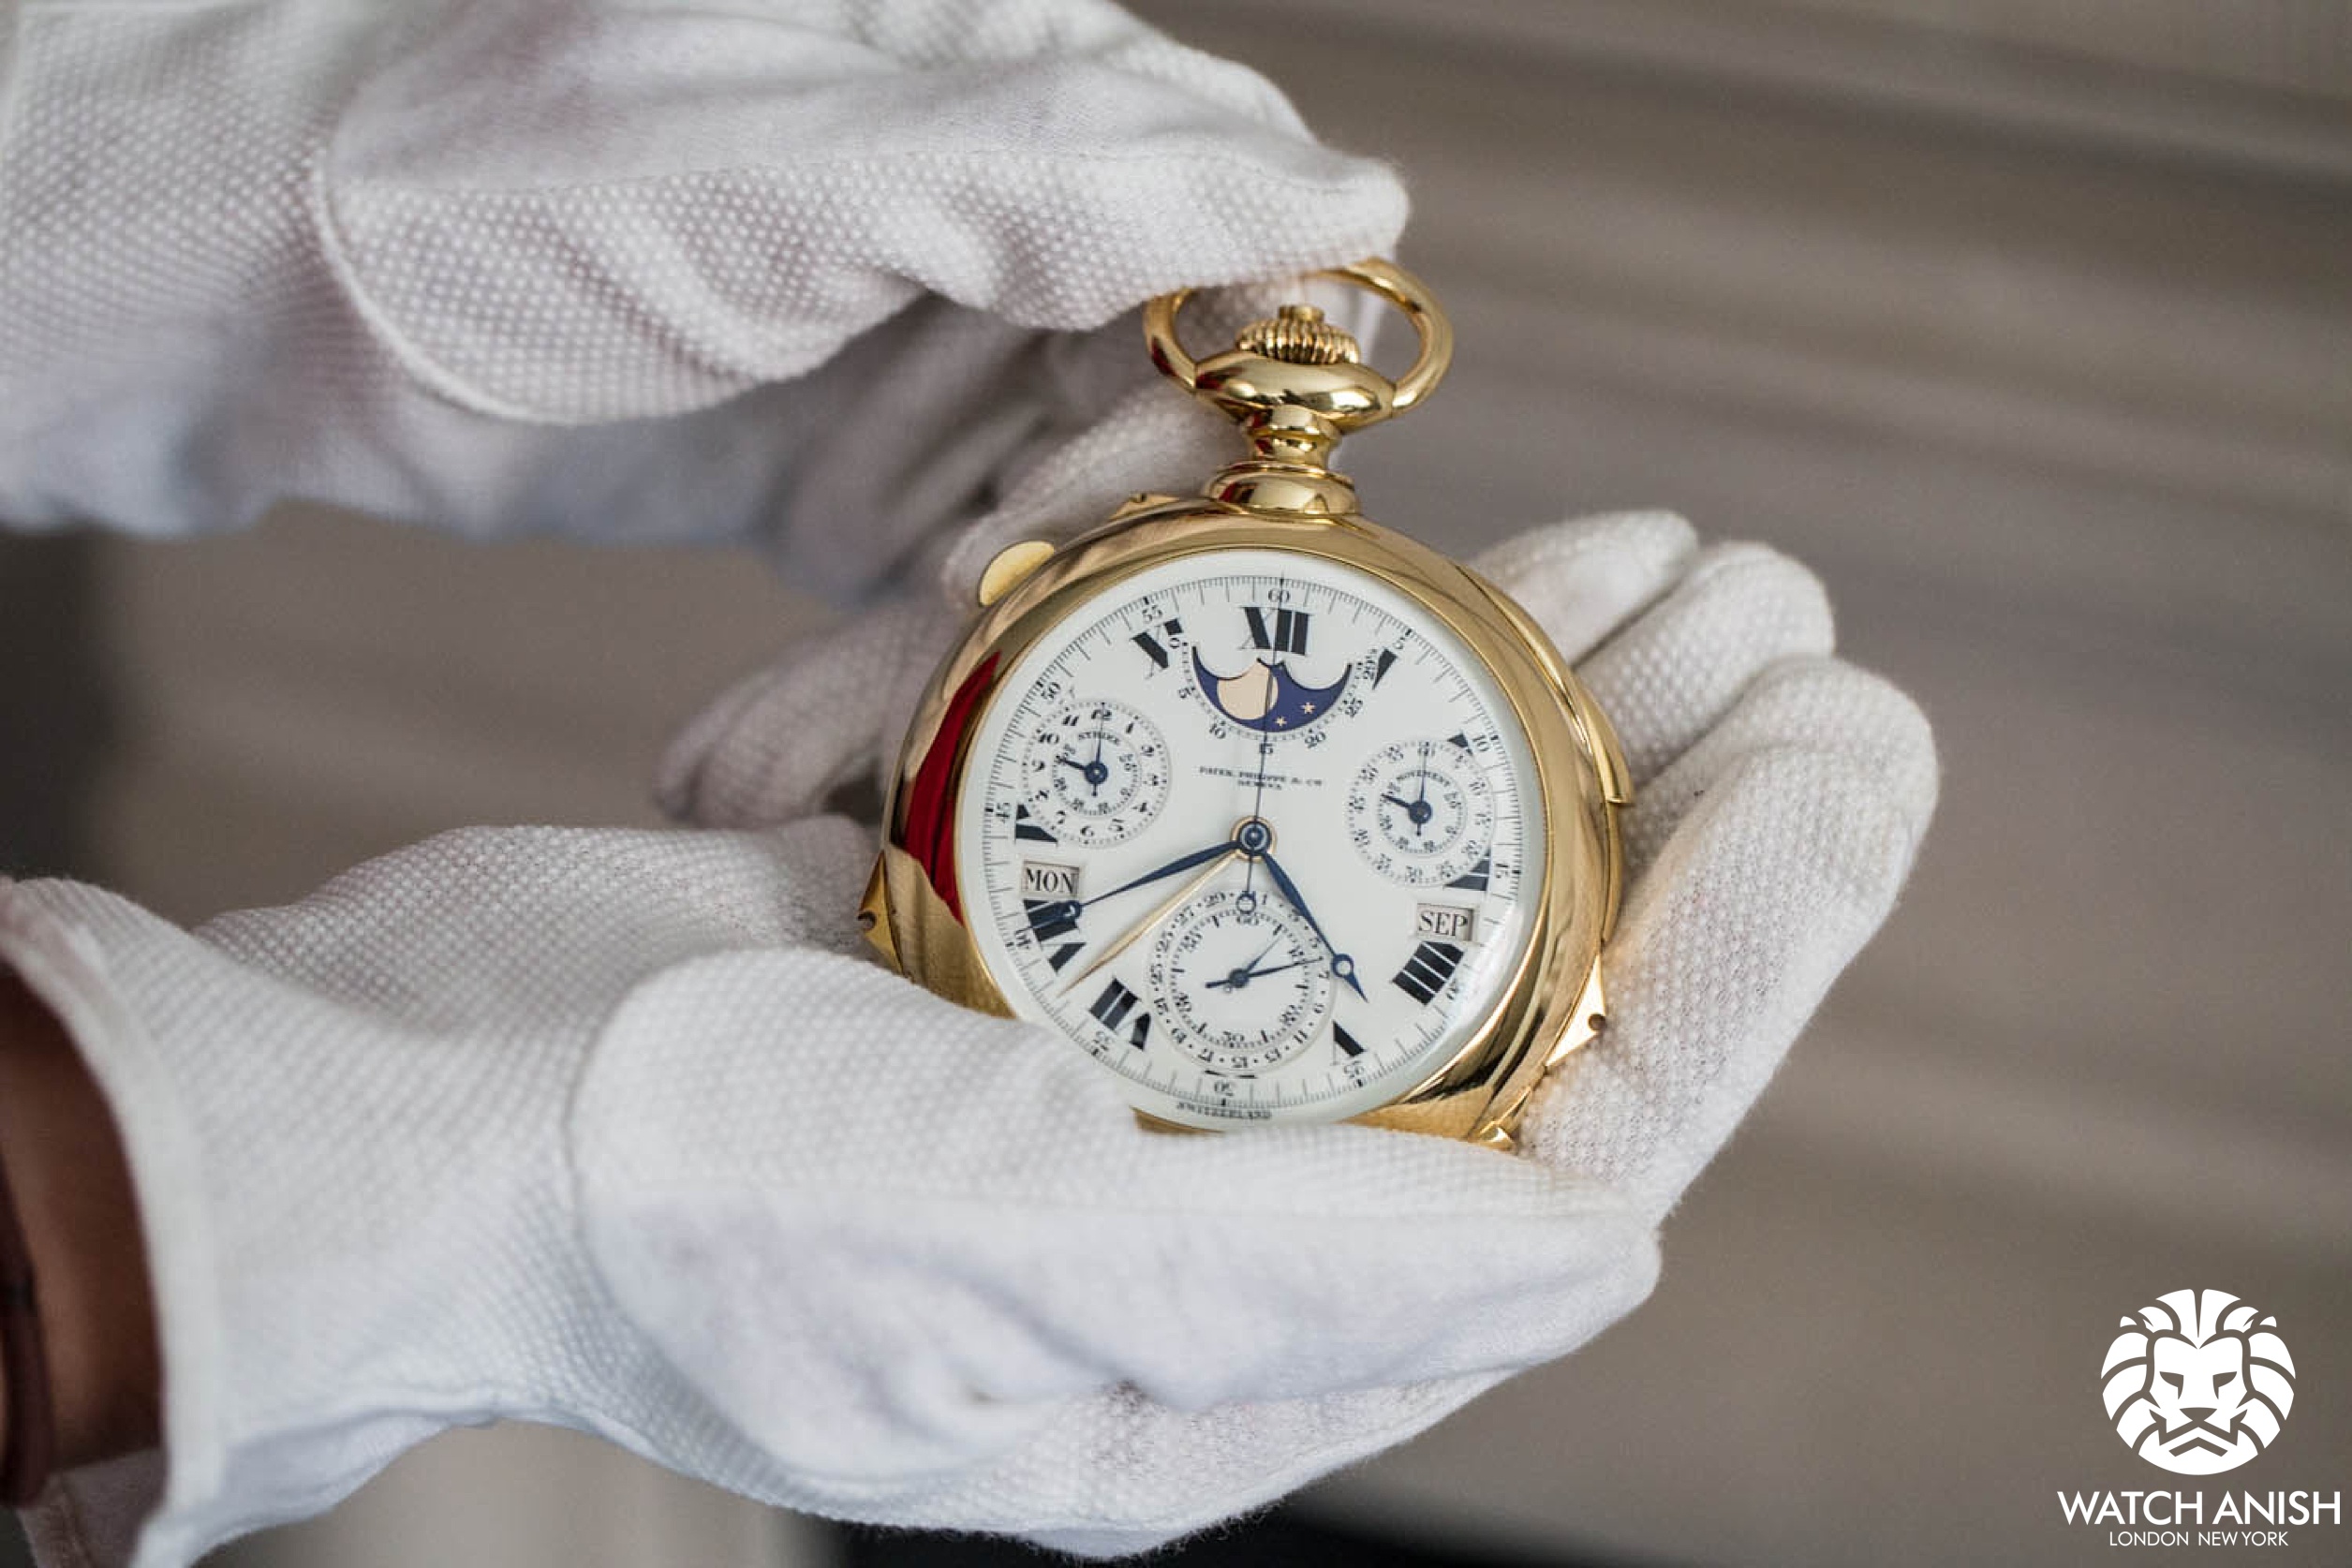 Most Expensive Watch: Henry Graves "Supercomplication," by Patek Philipe.
Price: $24,000,000.